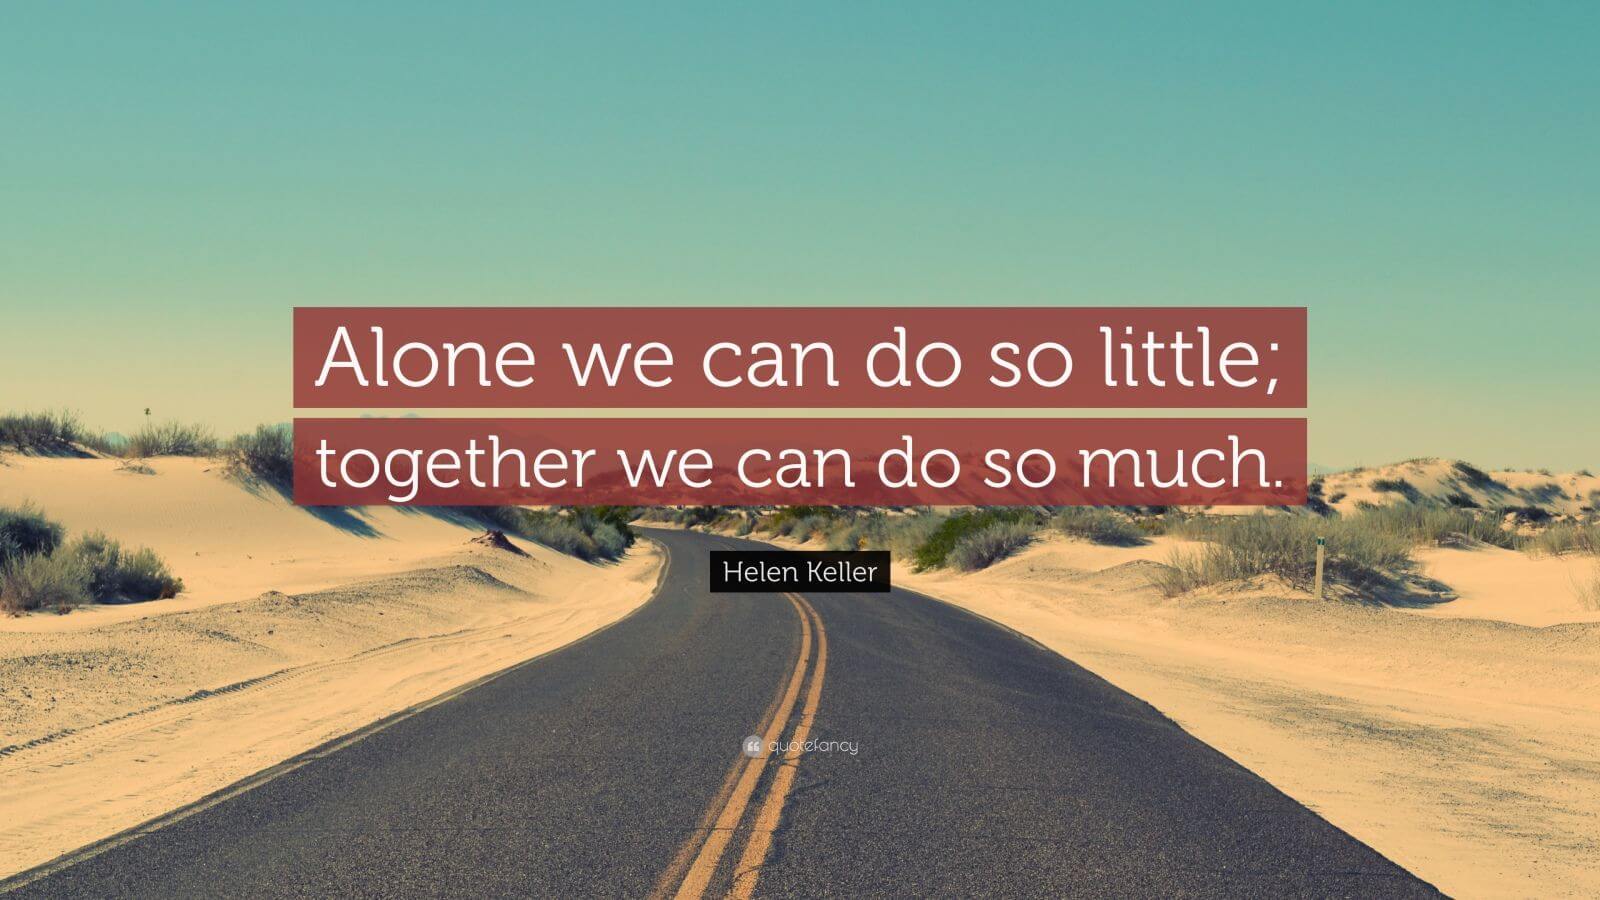 25052-Helen-Keller-Quote-Alone-we-can-do-so-little-together-we-can-do-so.jpg